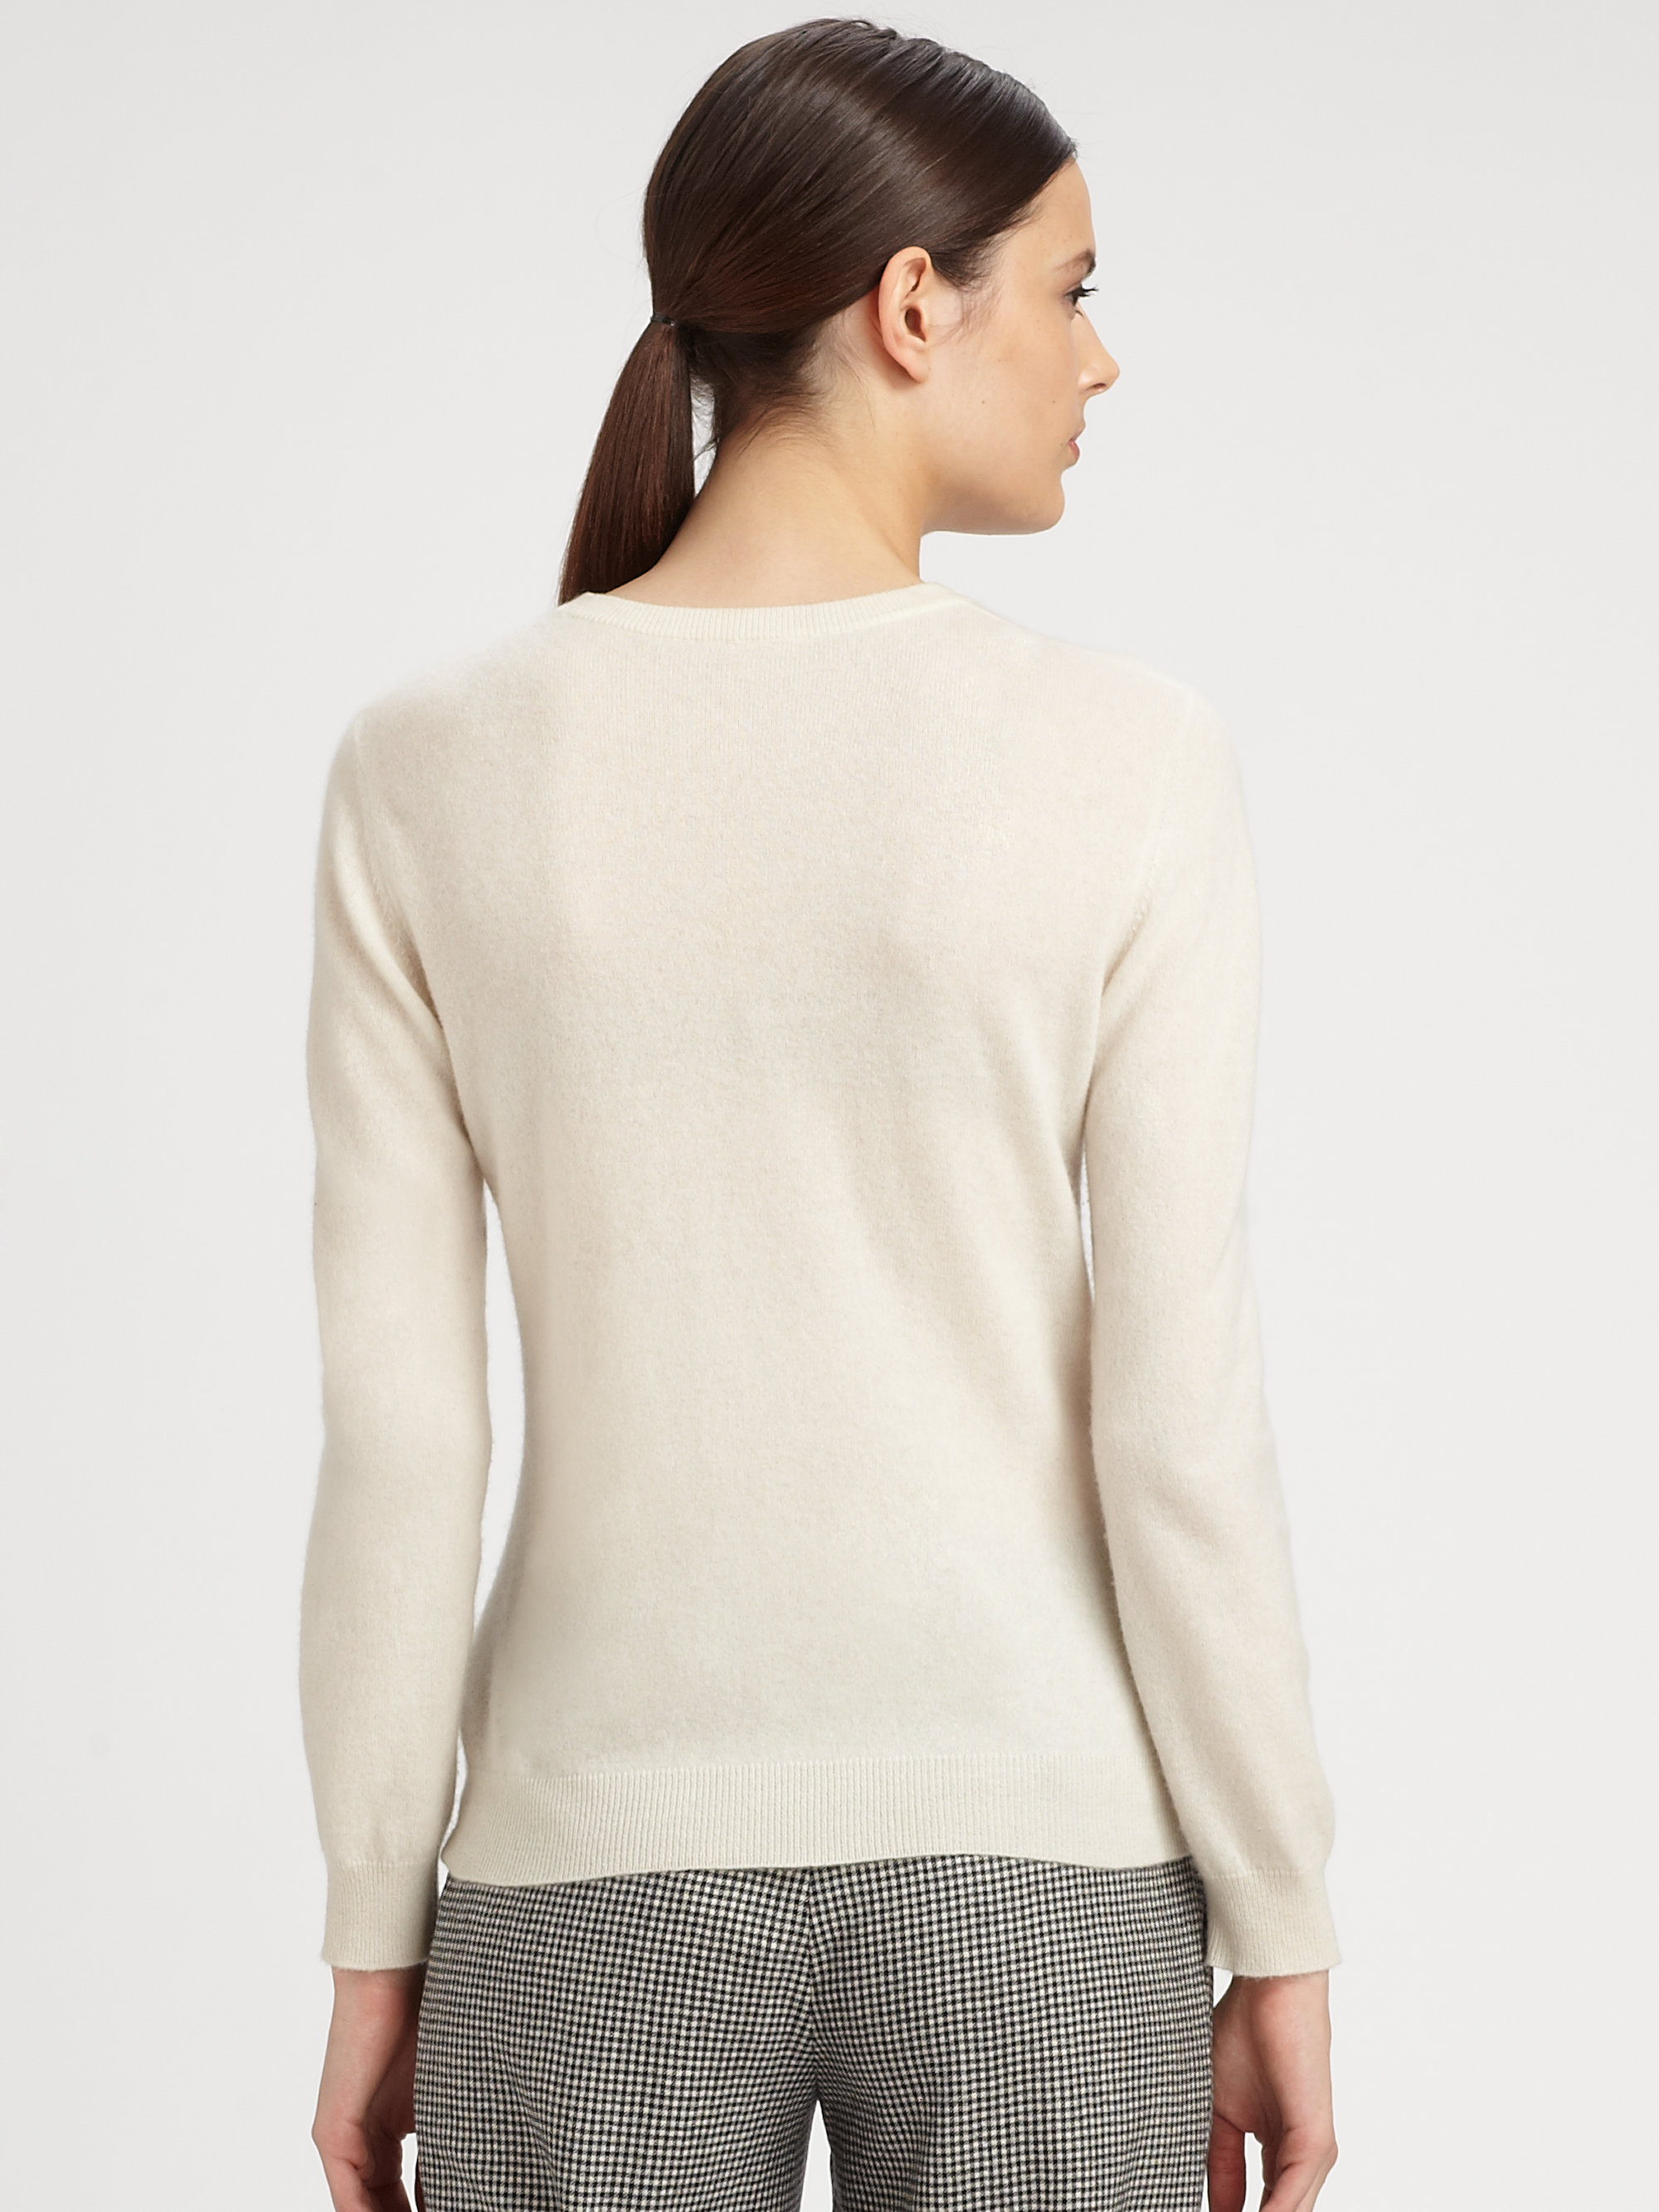 Lyst - Boutique Moschino Cashmere Catwalk Sweater in Natural